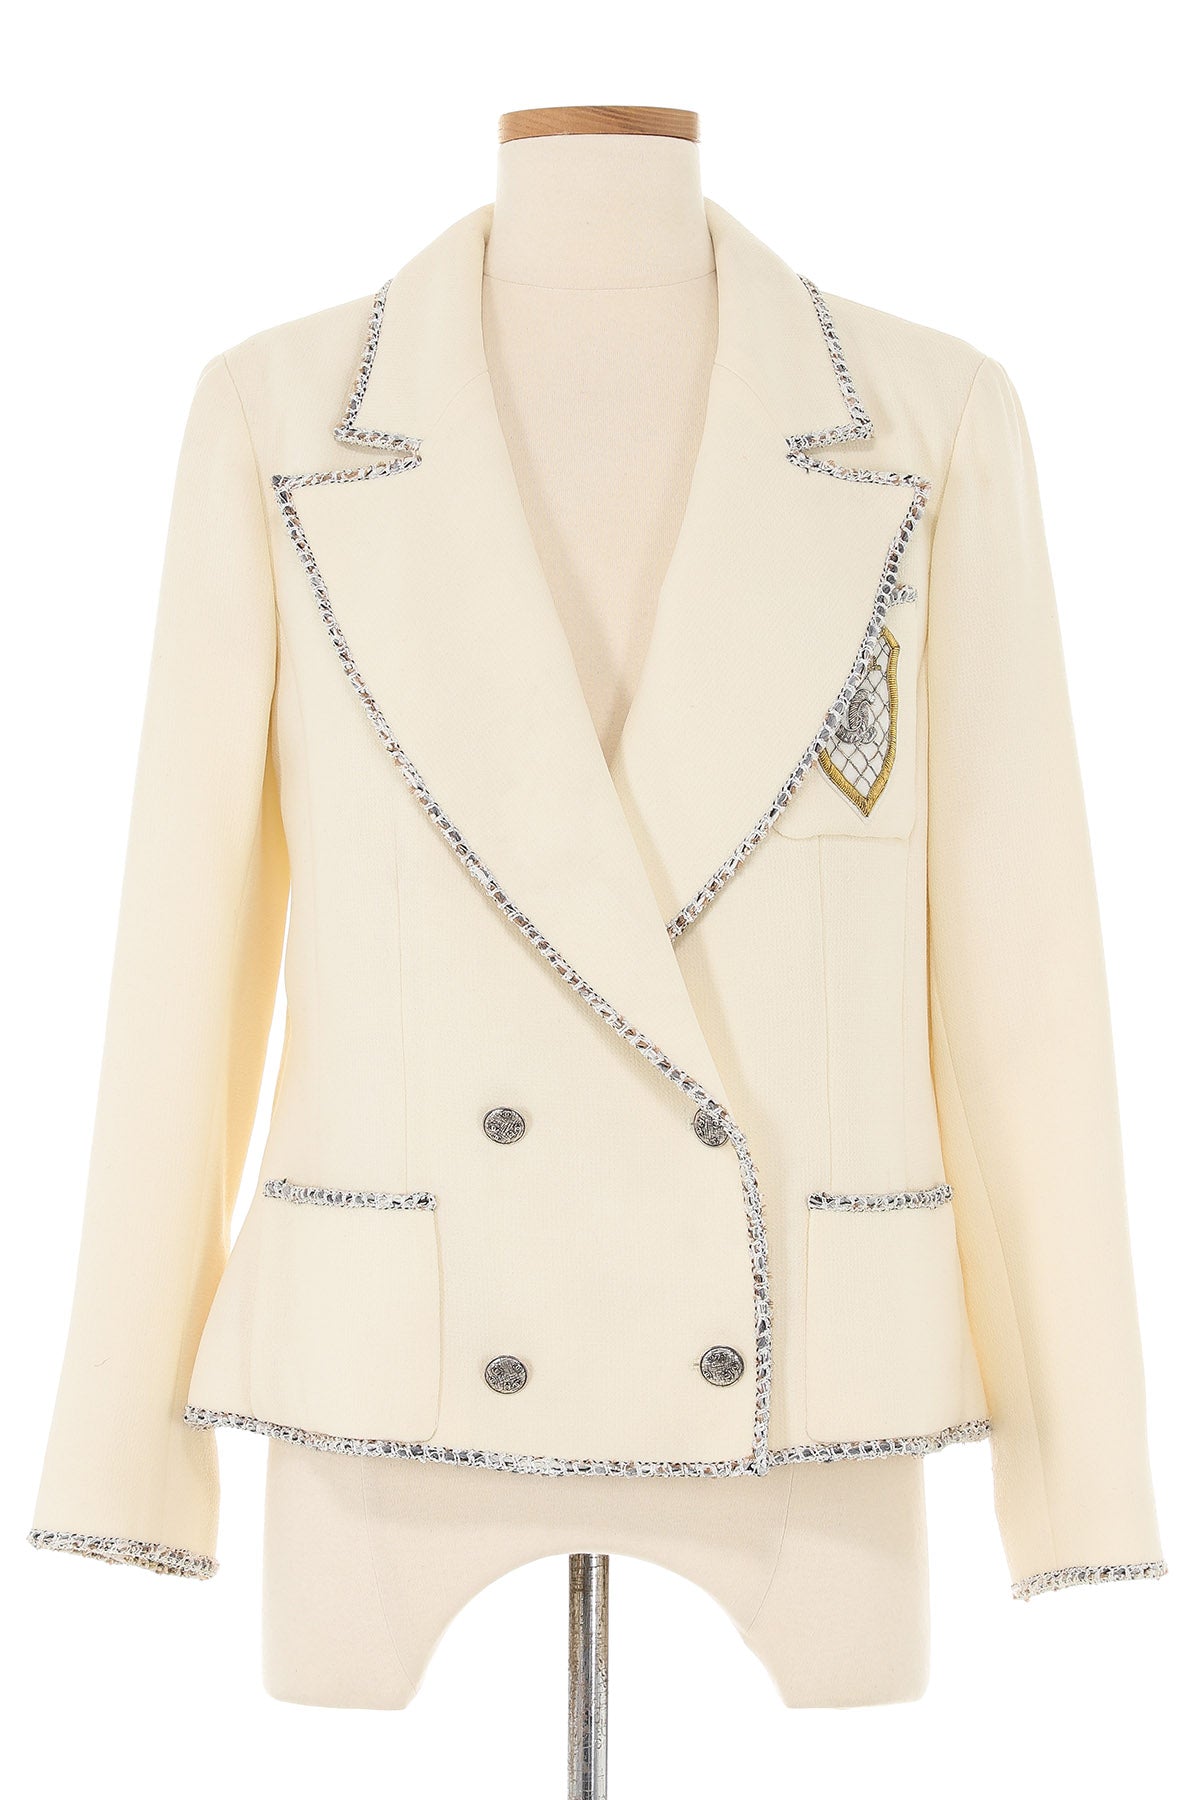 Chanel Vintage White Blazer with CC Crest | Cruise 2005 Collection